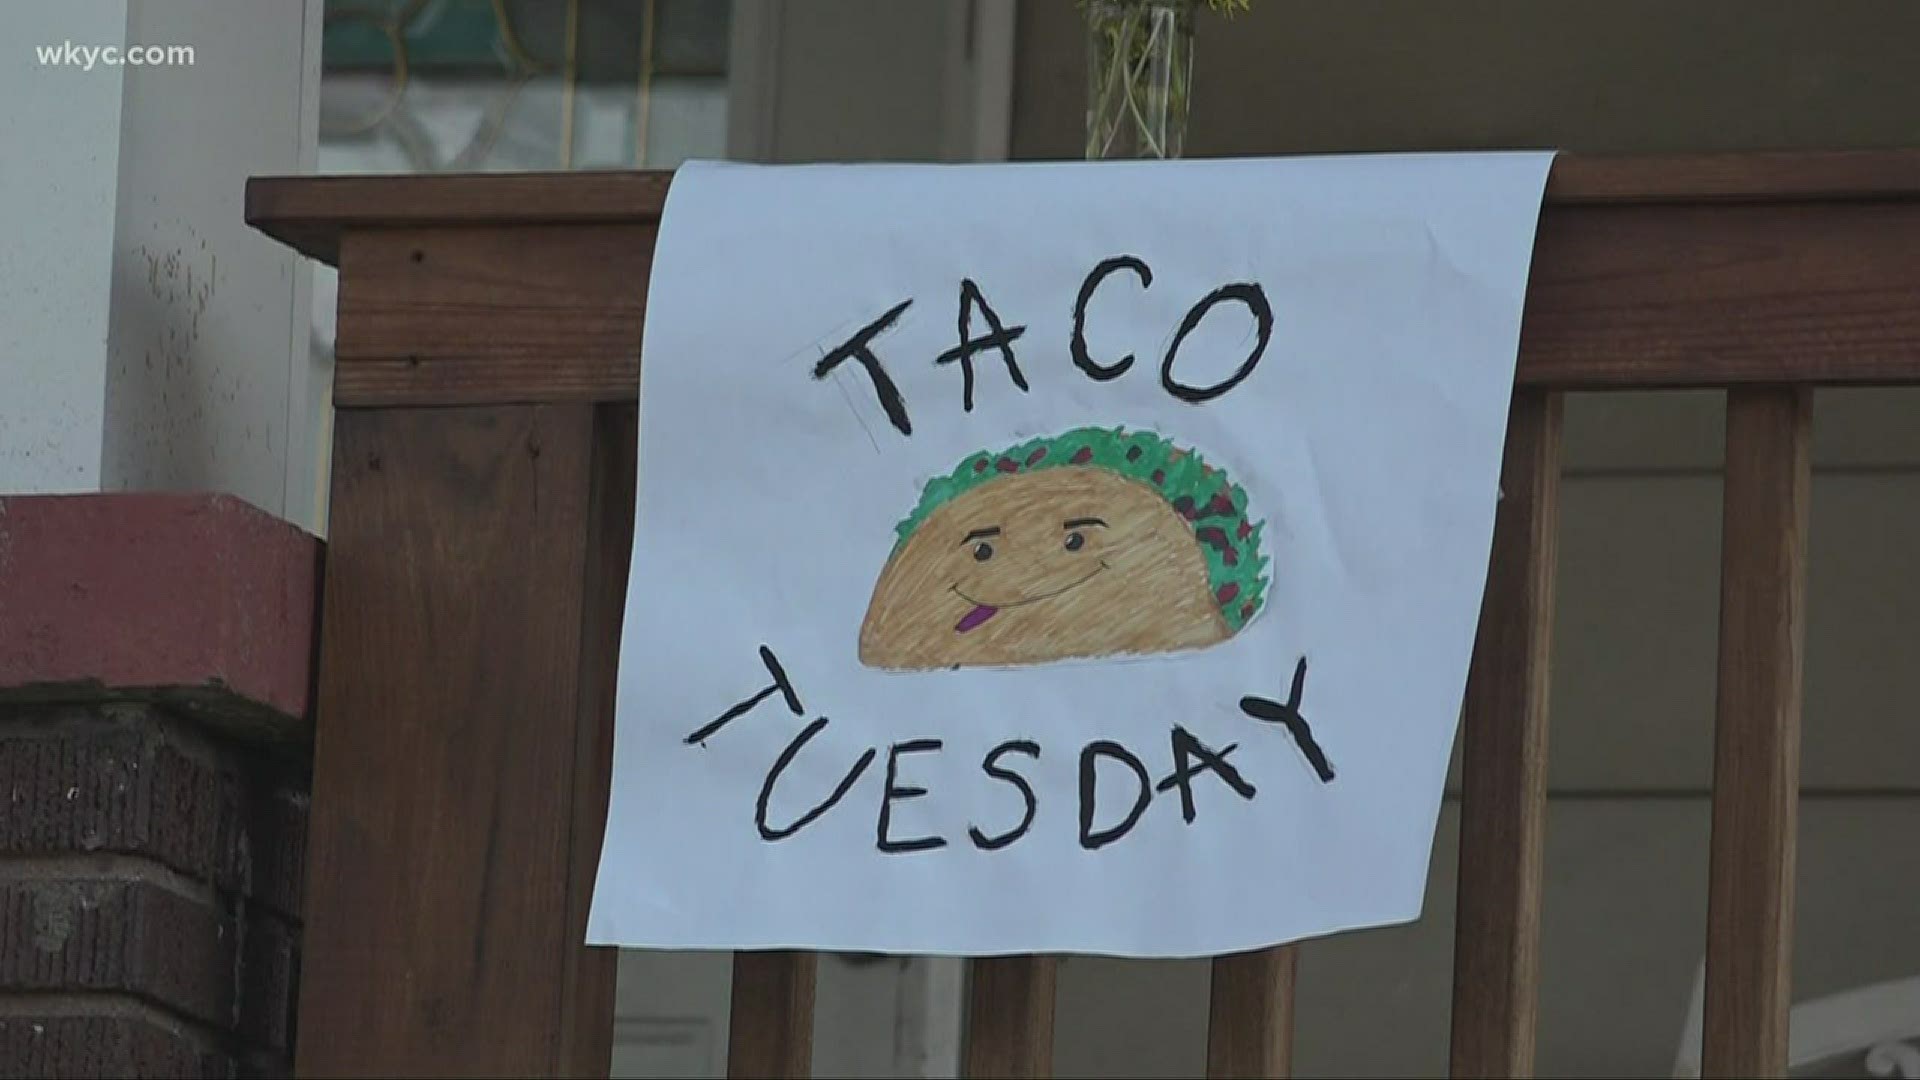 You may have heard LeBron James use that phrase a time or two, but now Taco Tuesday is coming to Akron. Will Ujek has this inredible story.